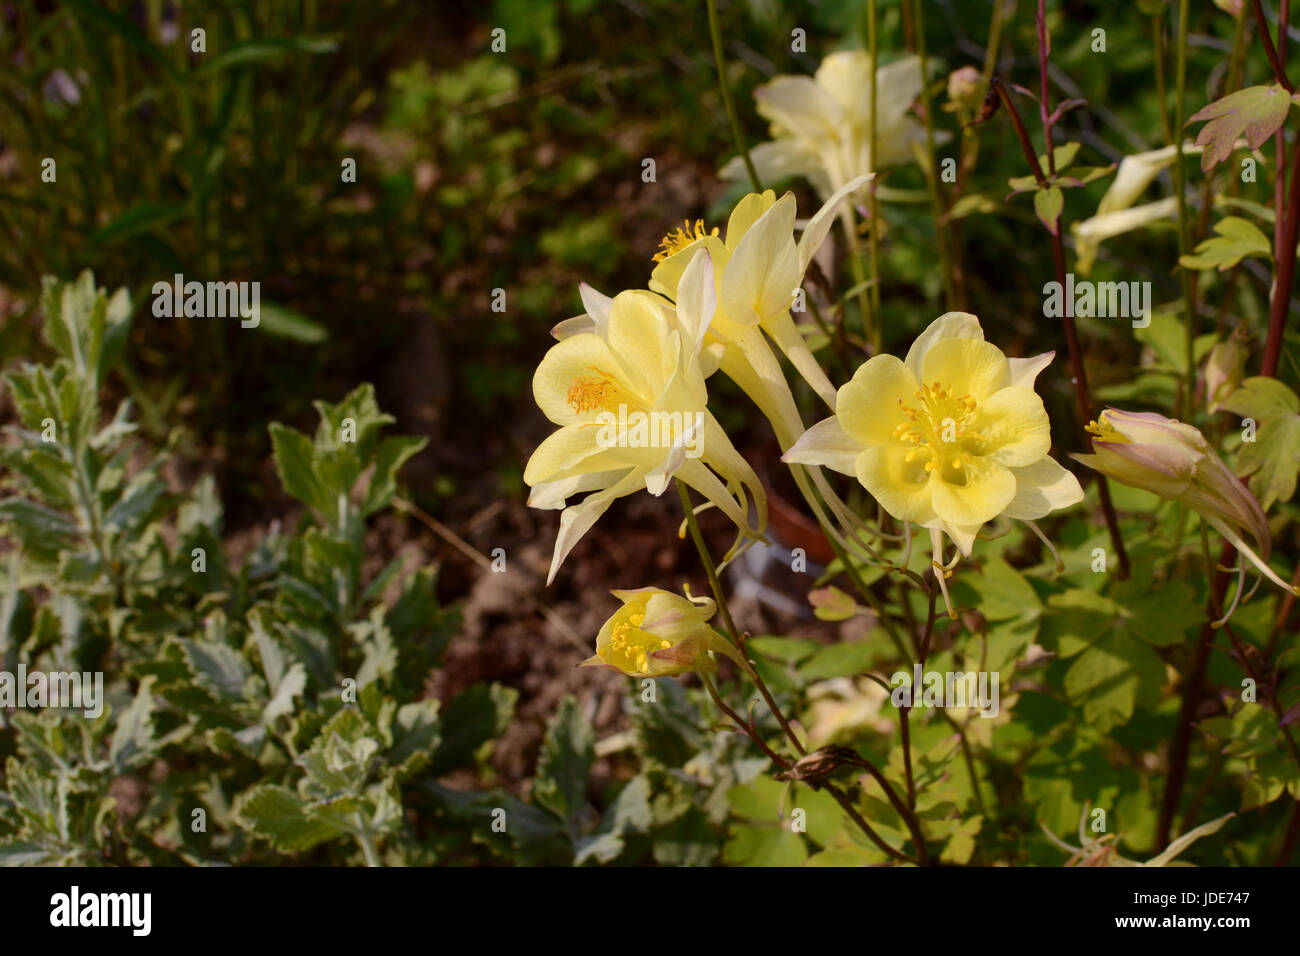 Pale yellow aquilegia flowers grow among other plants in a flower bed Stock Photo